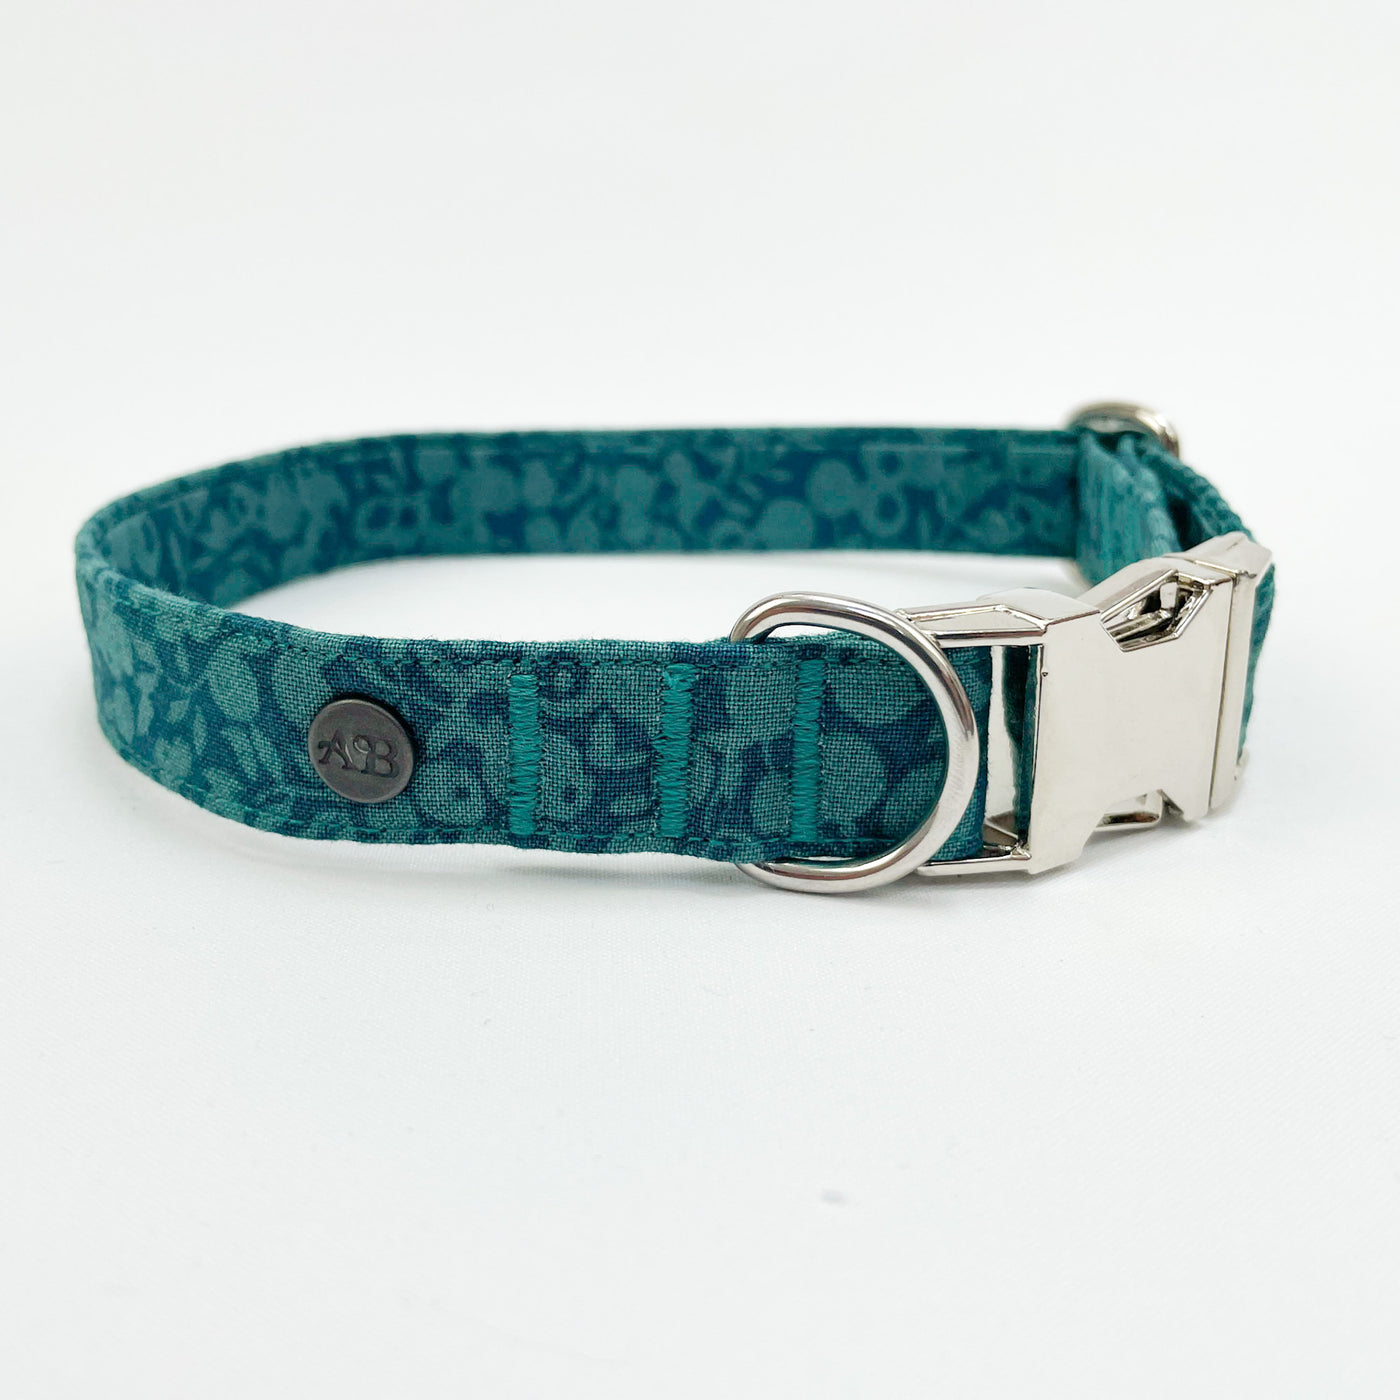 Liberty autumn emerald dog collar with a silver hardware and Albie's quality seal.